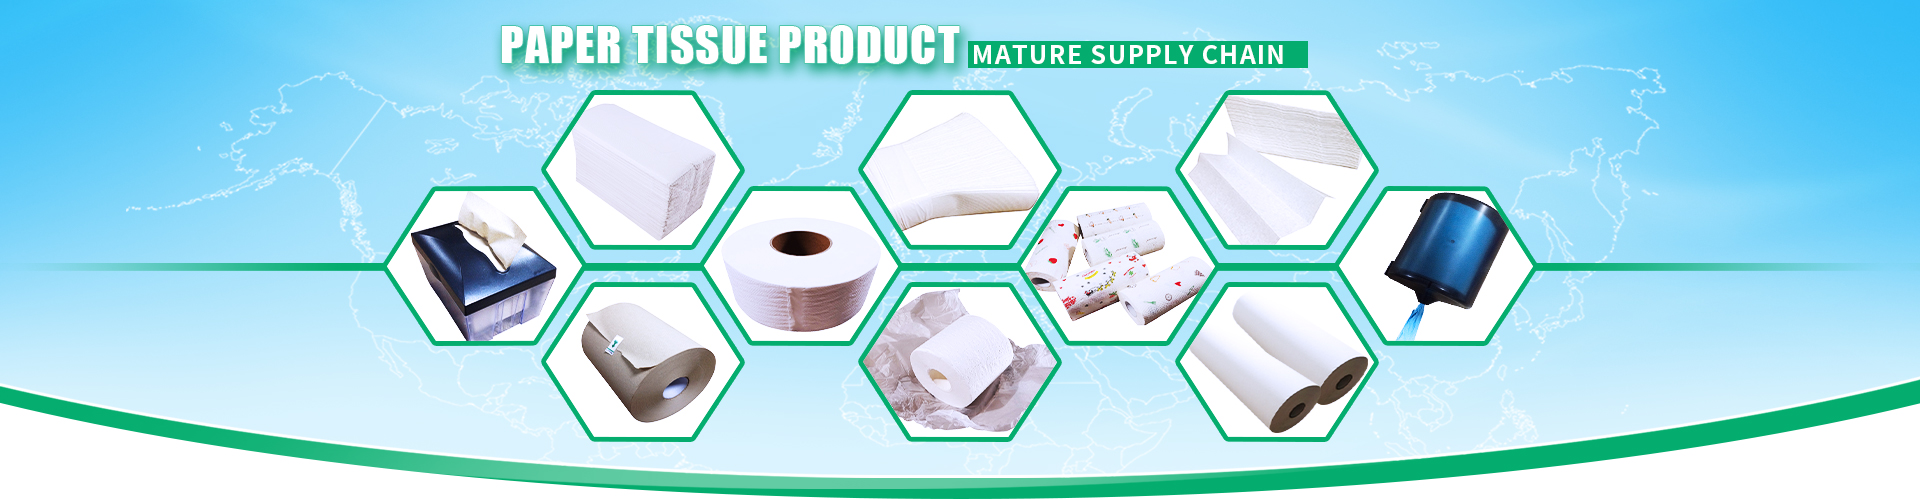 Print Jumbo Toilet Tissue - Chaozhou Soft Paper Products Co.,Ltd